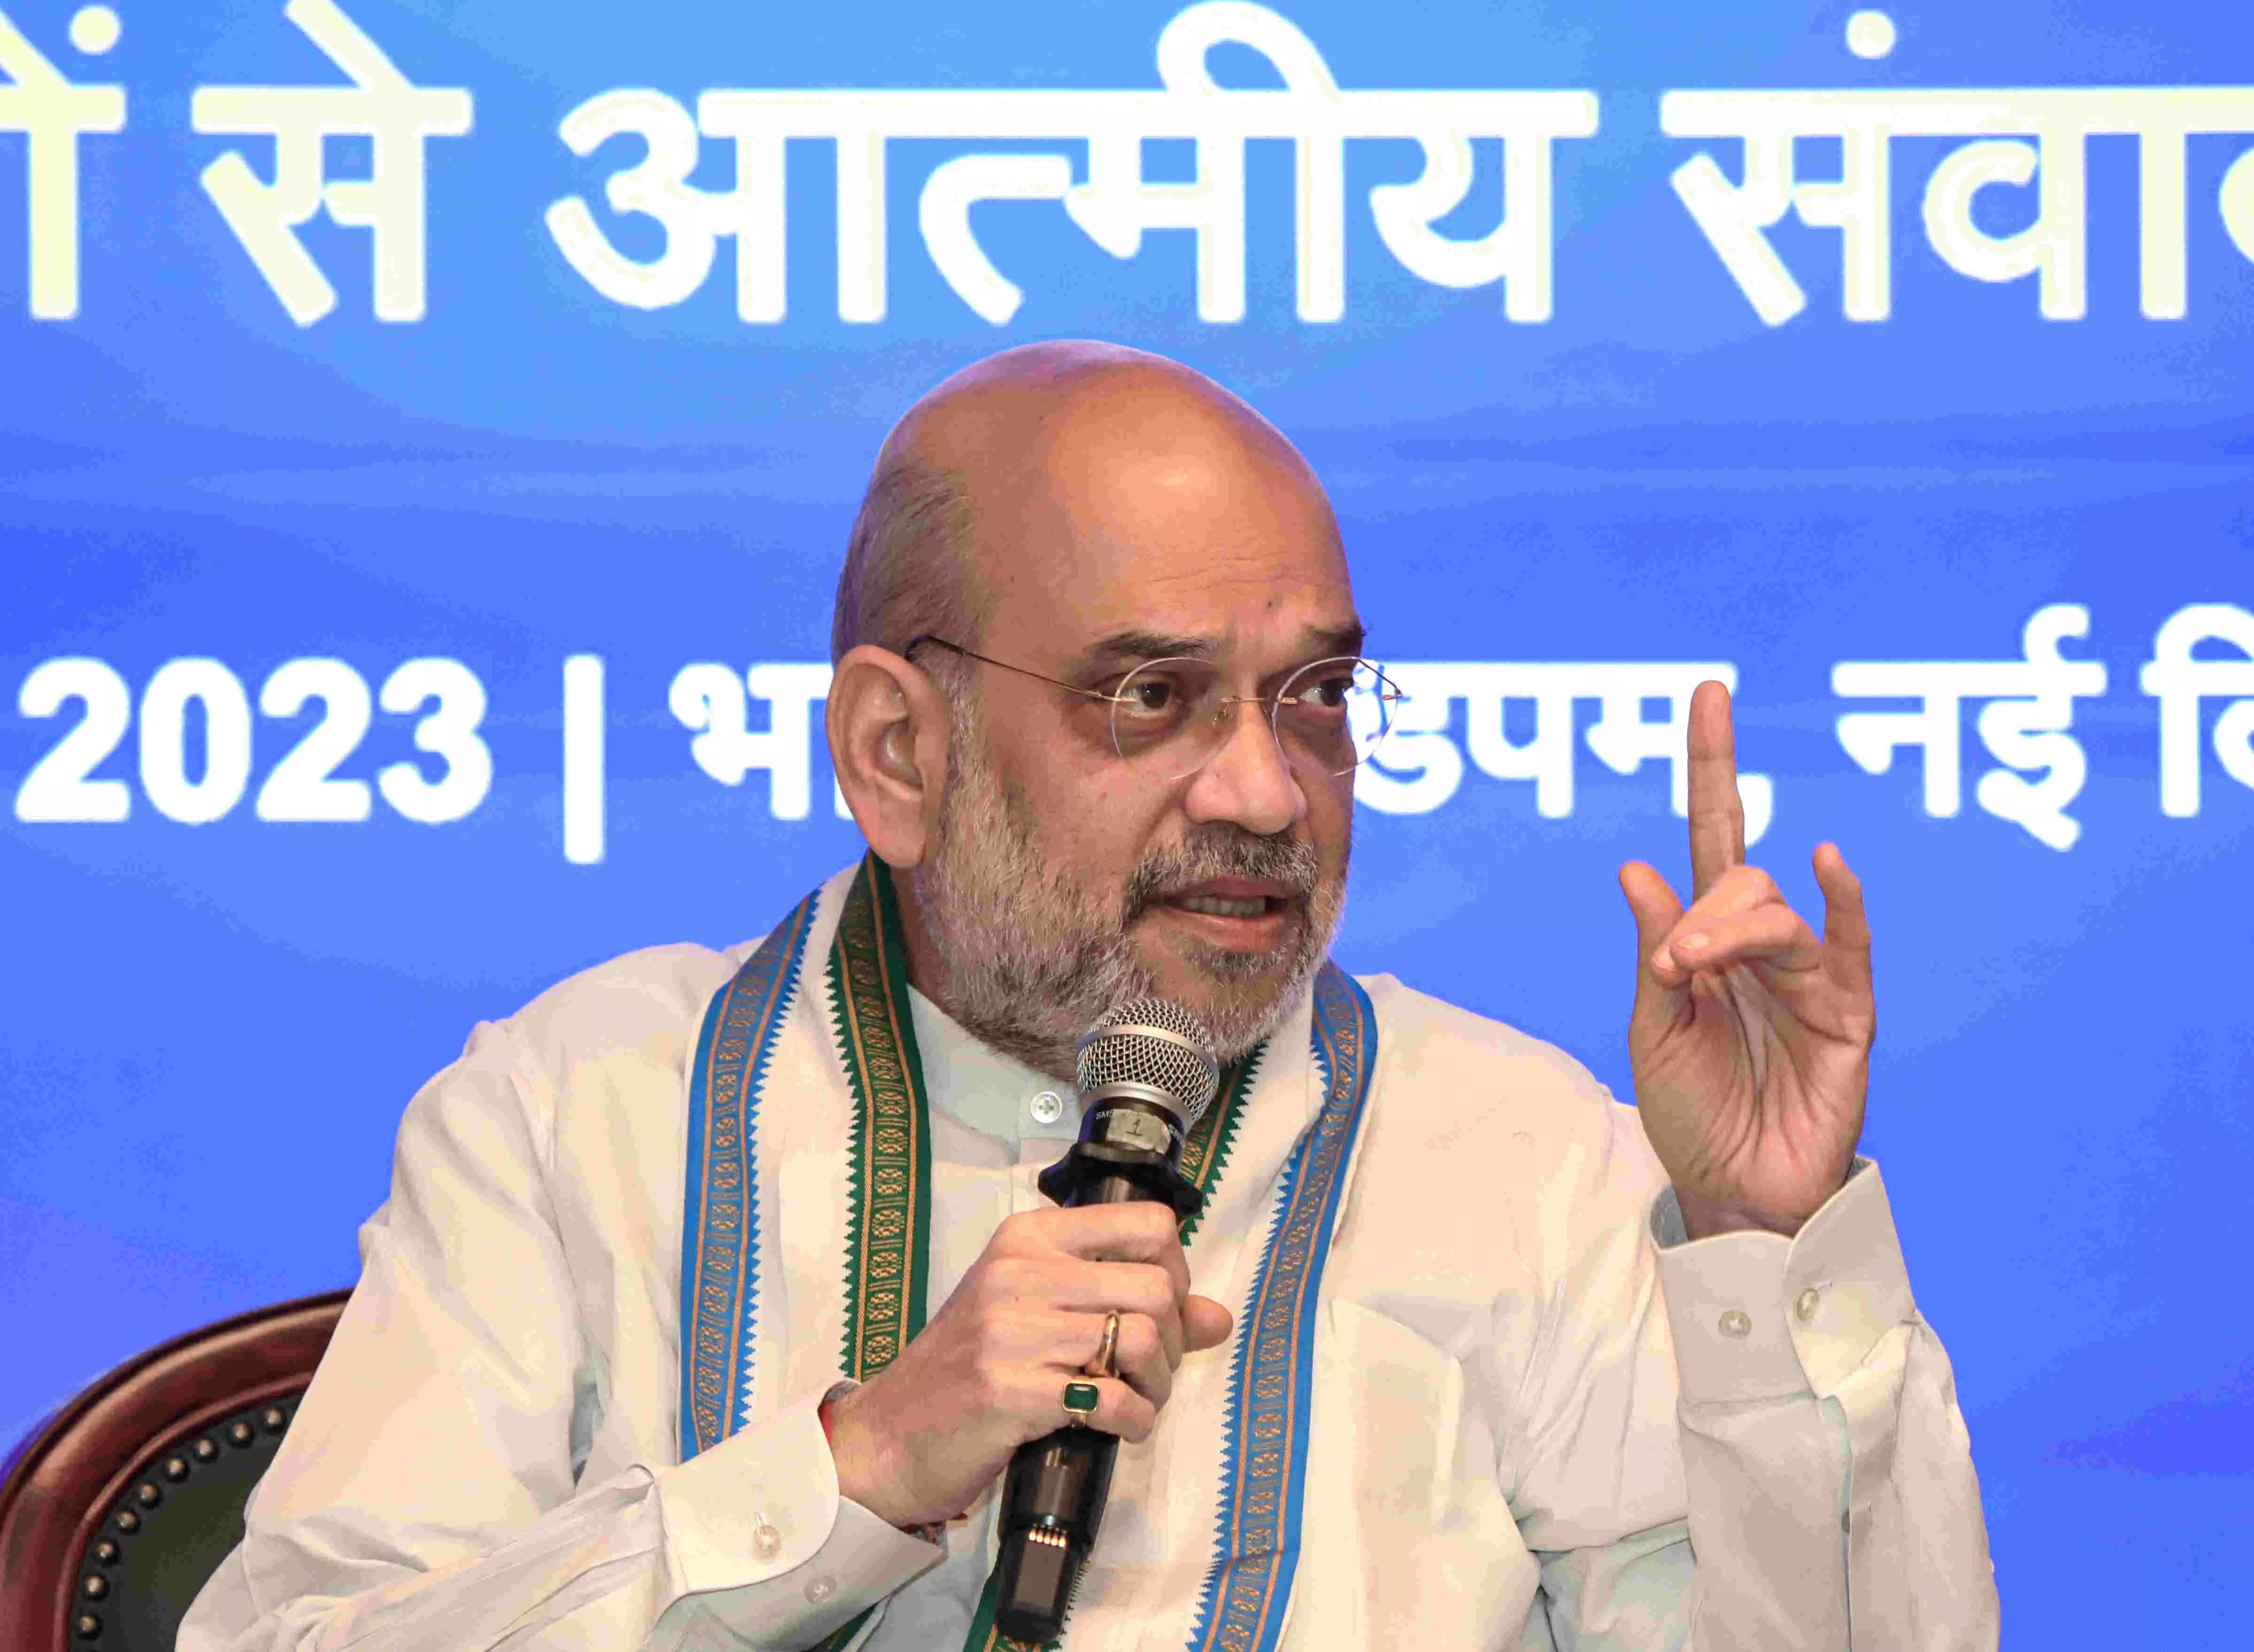 New Bills replacing IPC, CrPC, Evidence Act will be passed soon assures Union Home Minister Amit Shah